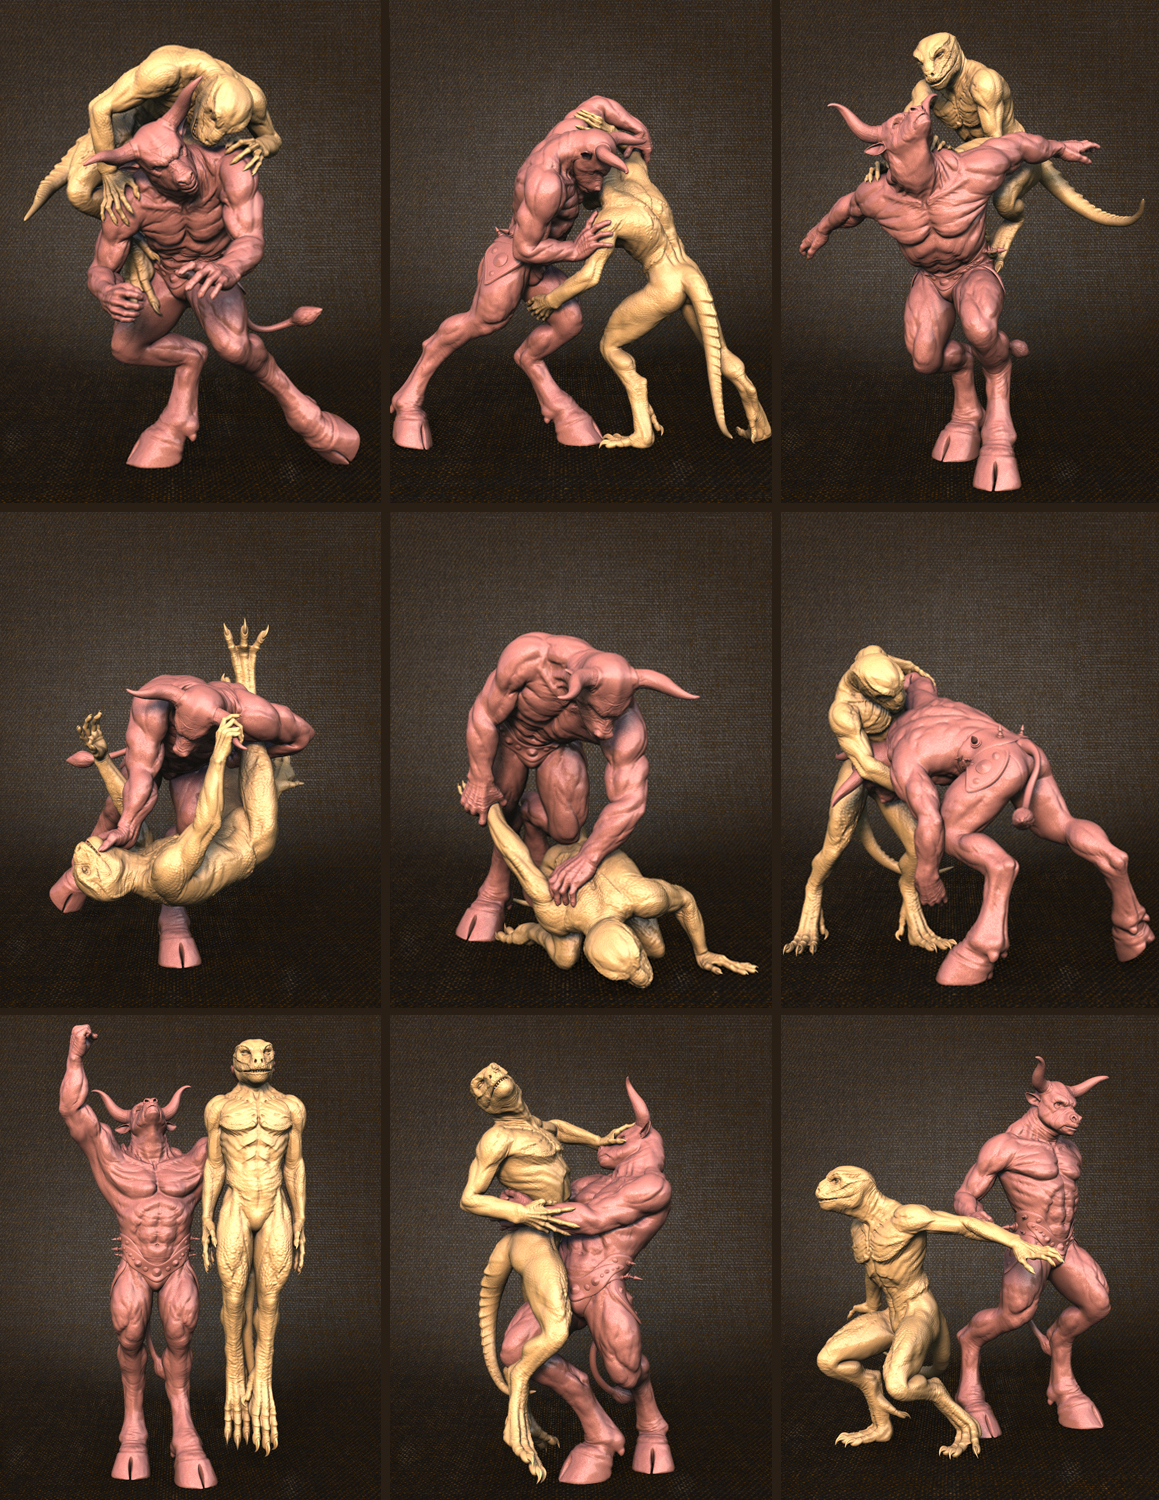 Combat Poses for Minotaur 6 and Reptilian 6 by: Quixotry, 3D Models by Daz 3D